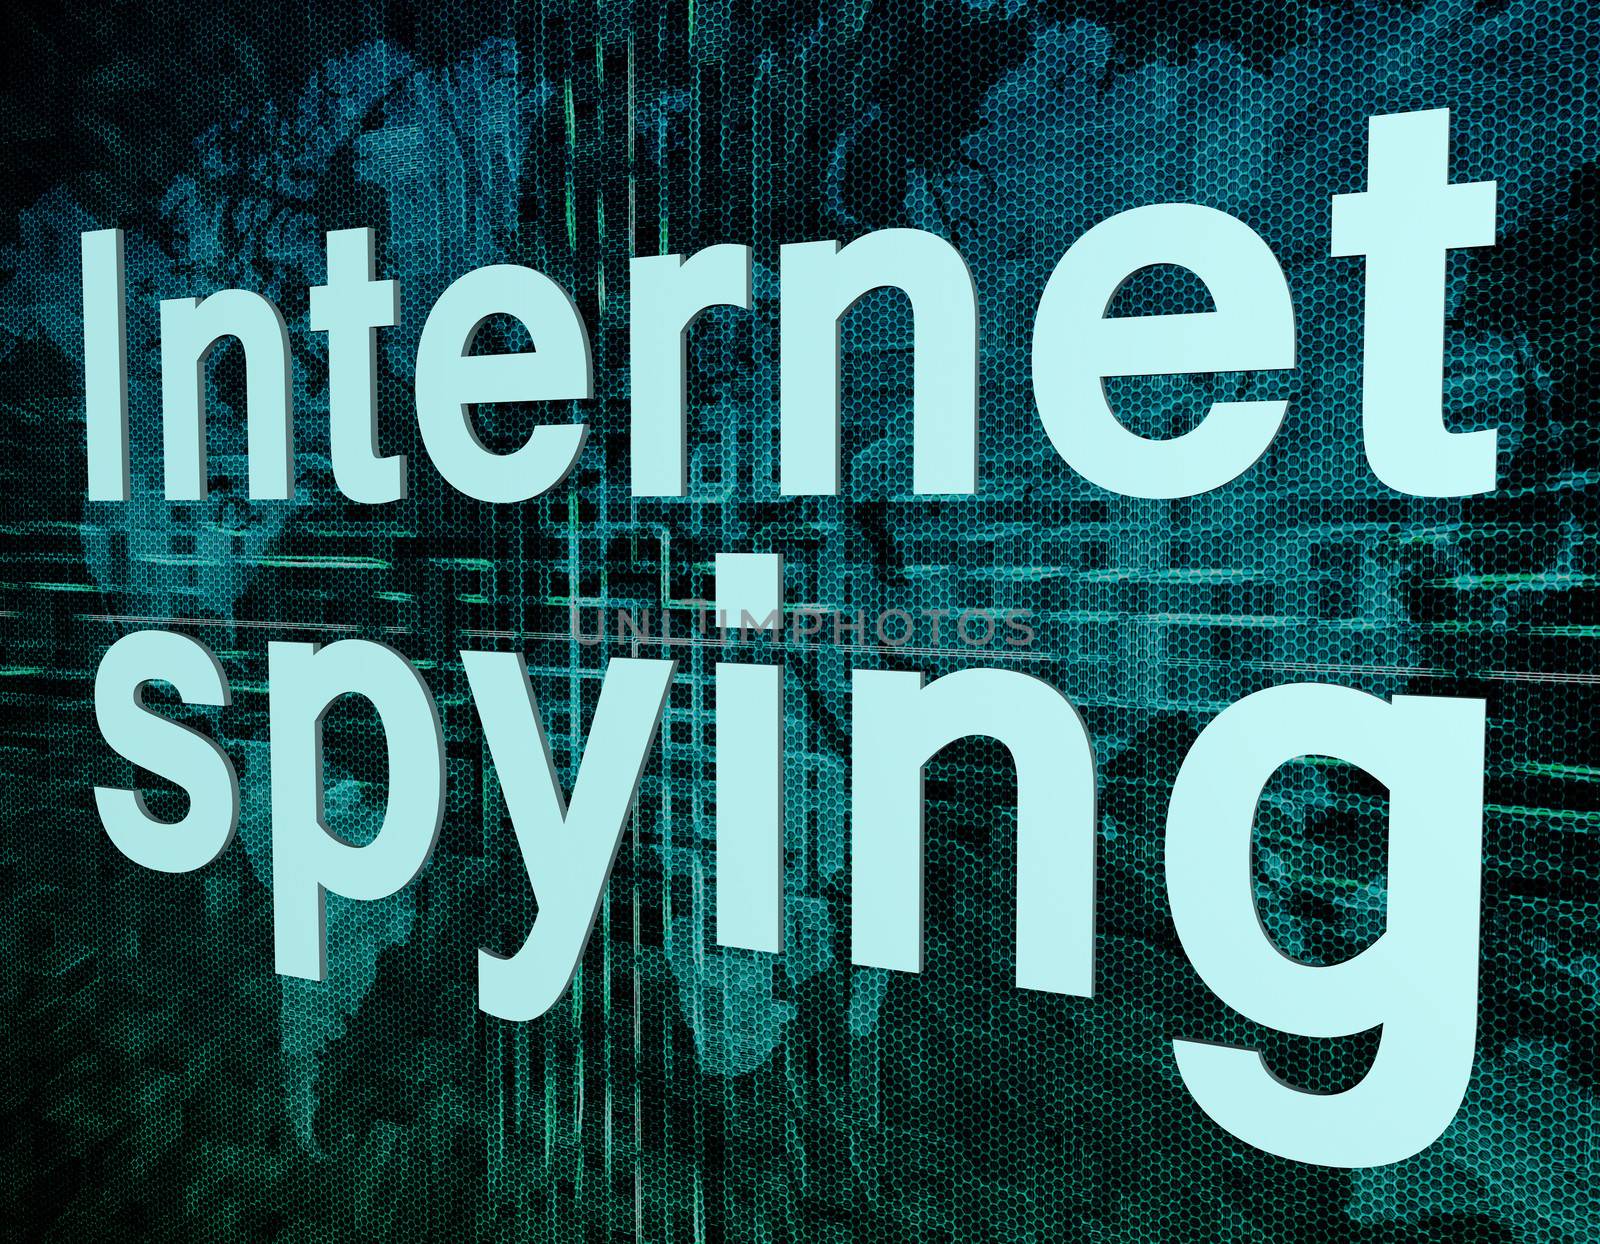 Words on digital world map concept: Internet spying